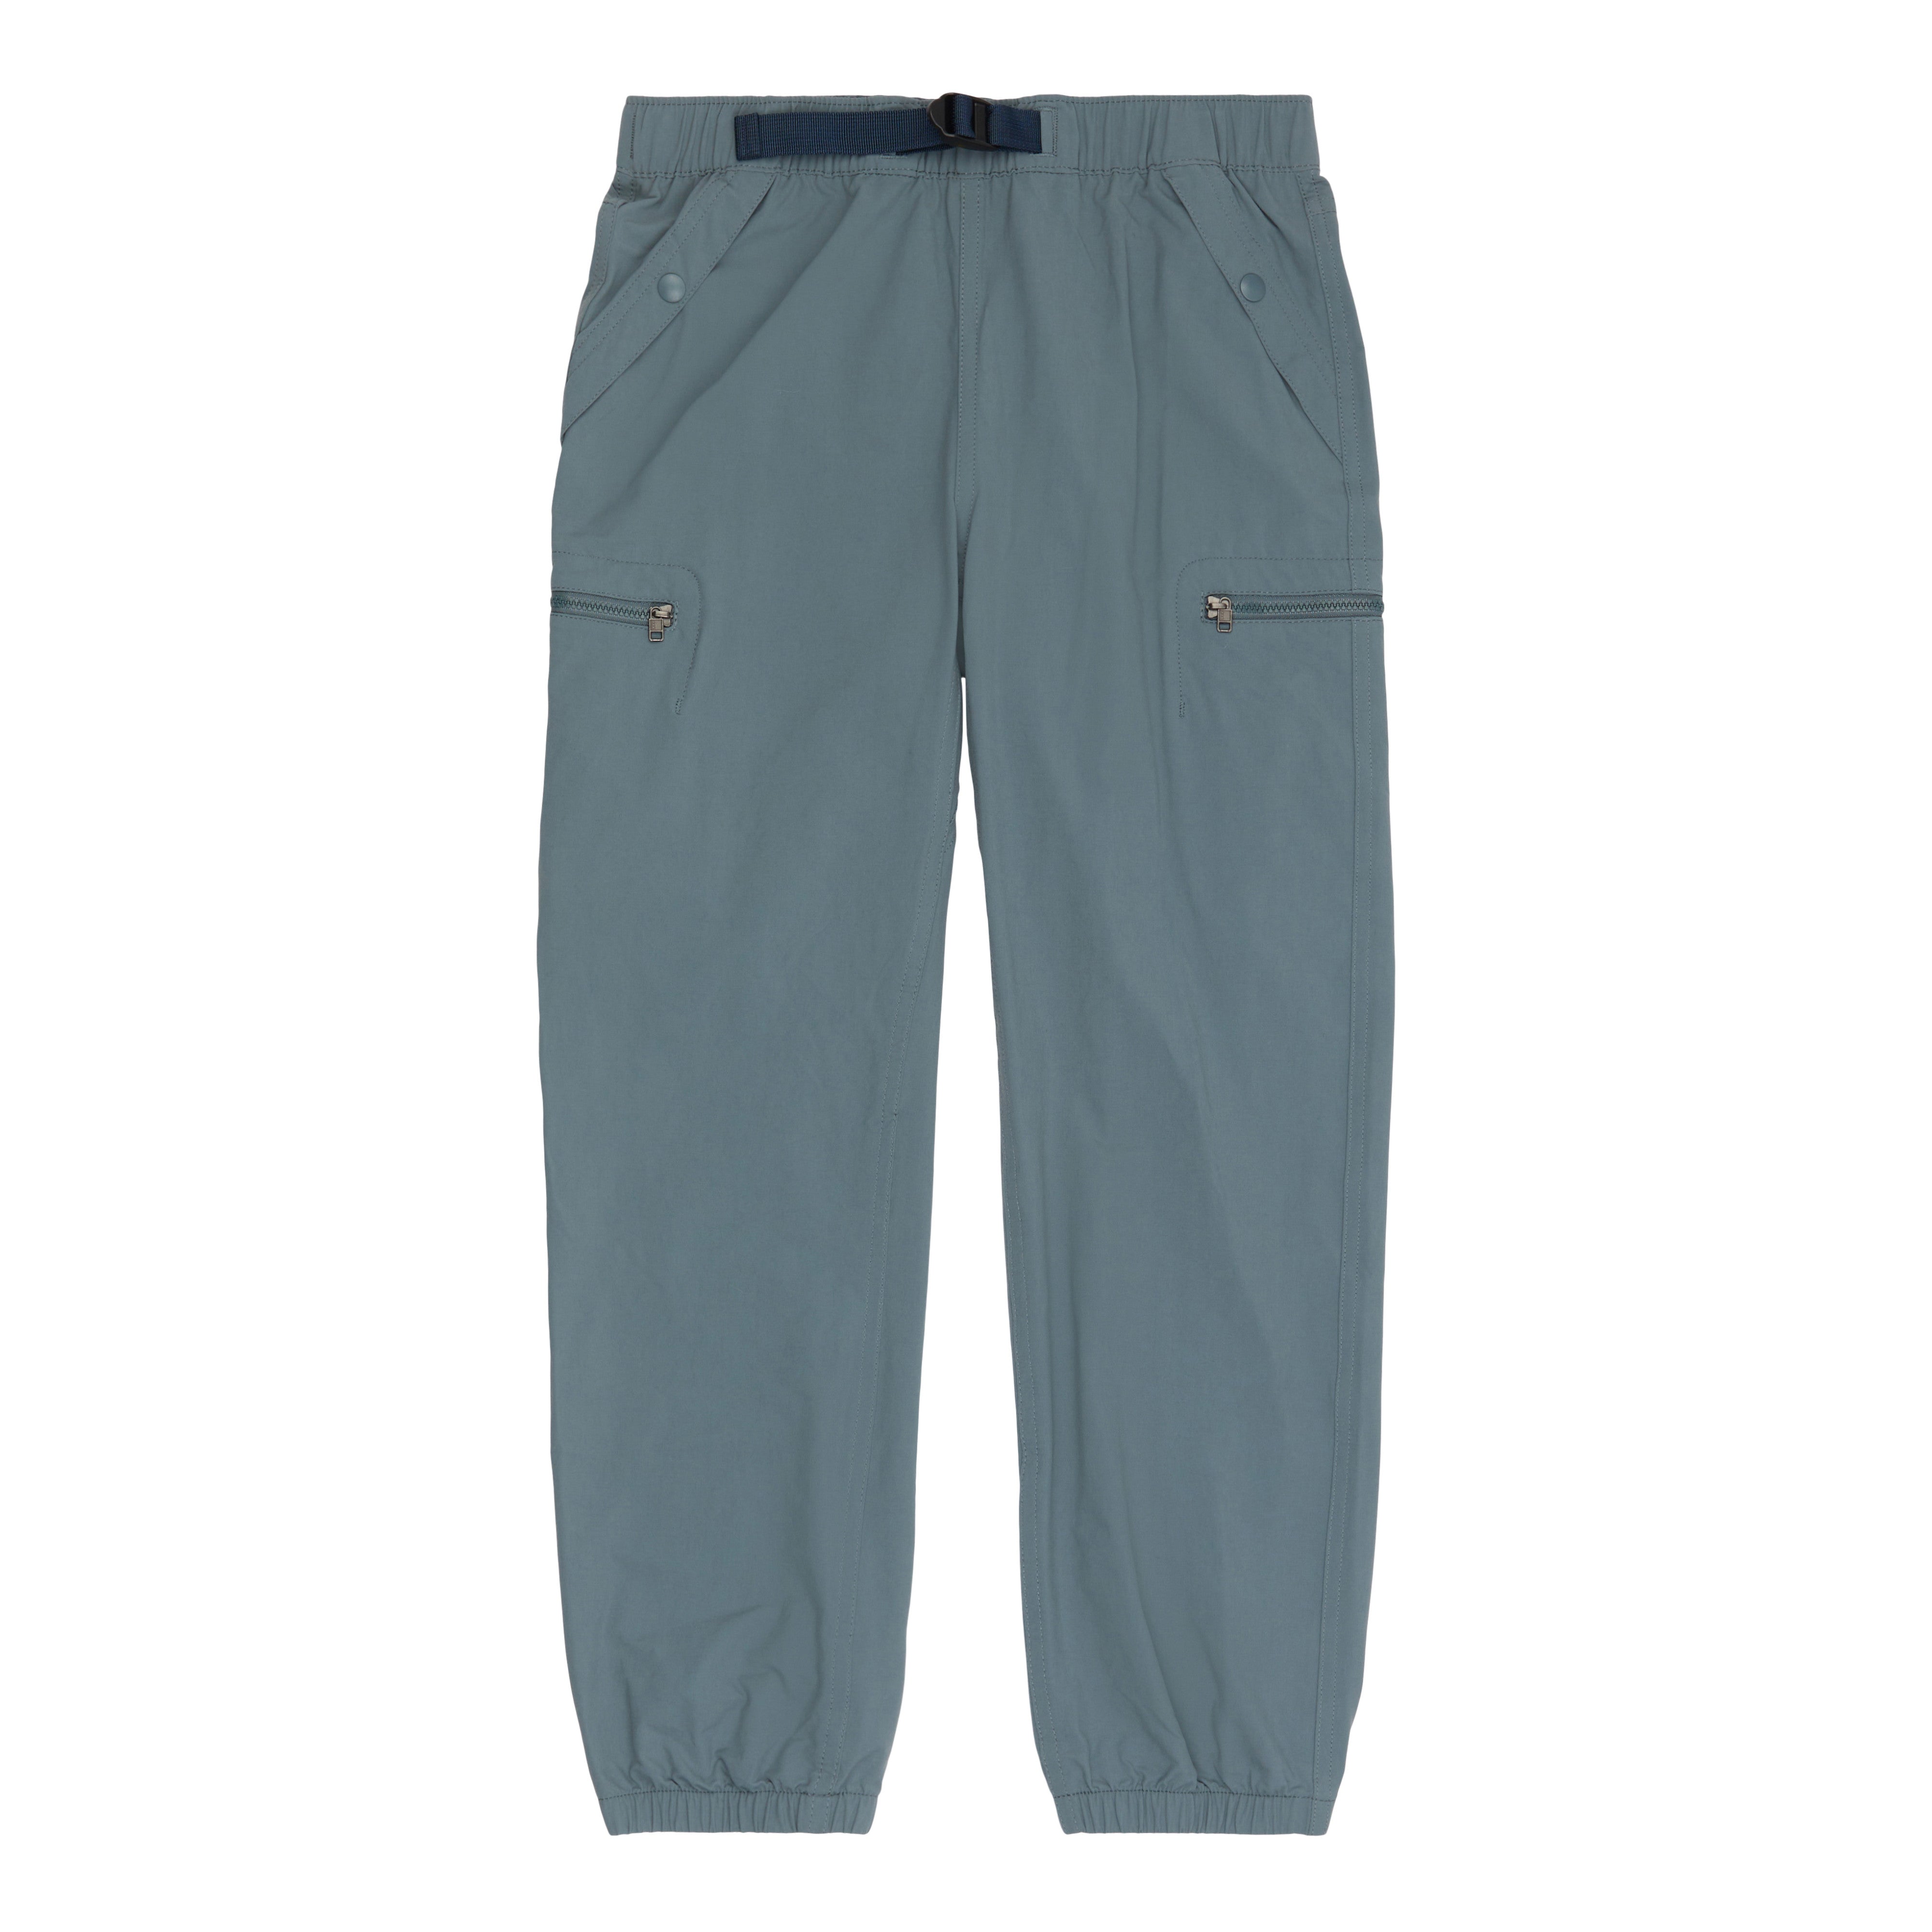 Patagonia Outdoor Everyday Pant - Oar Tan – Route One